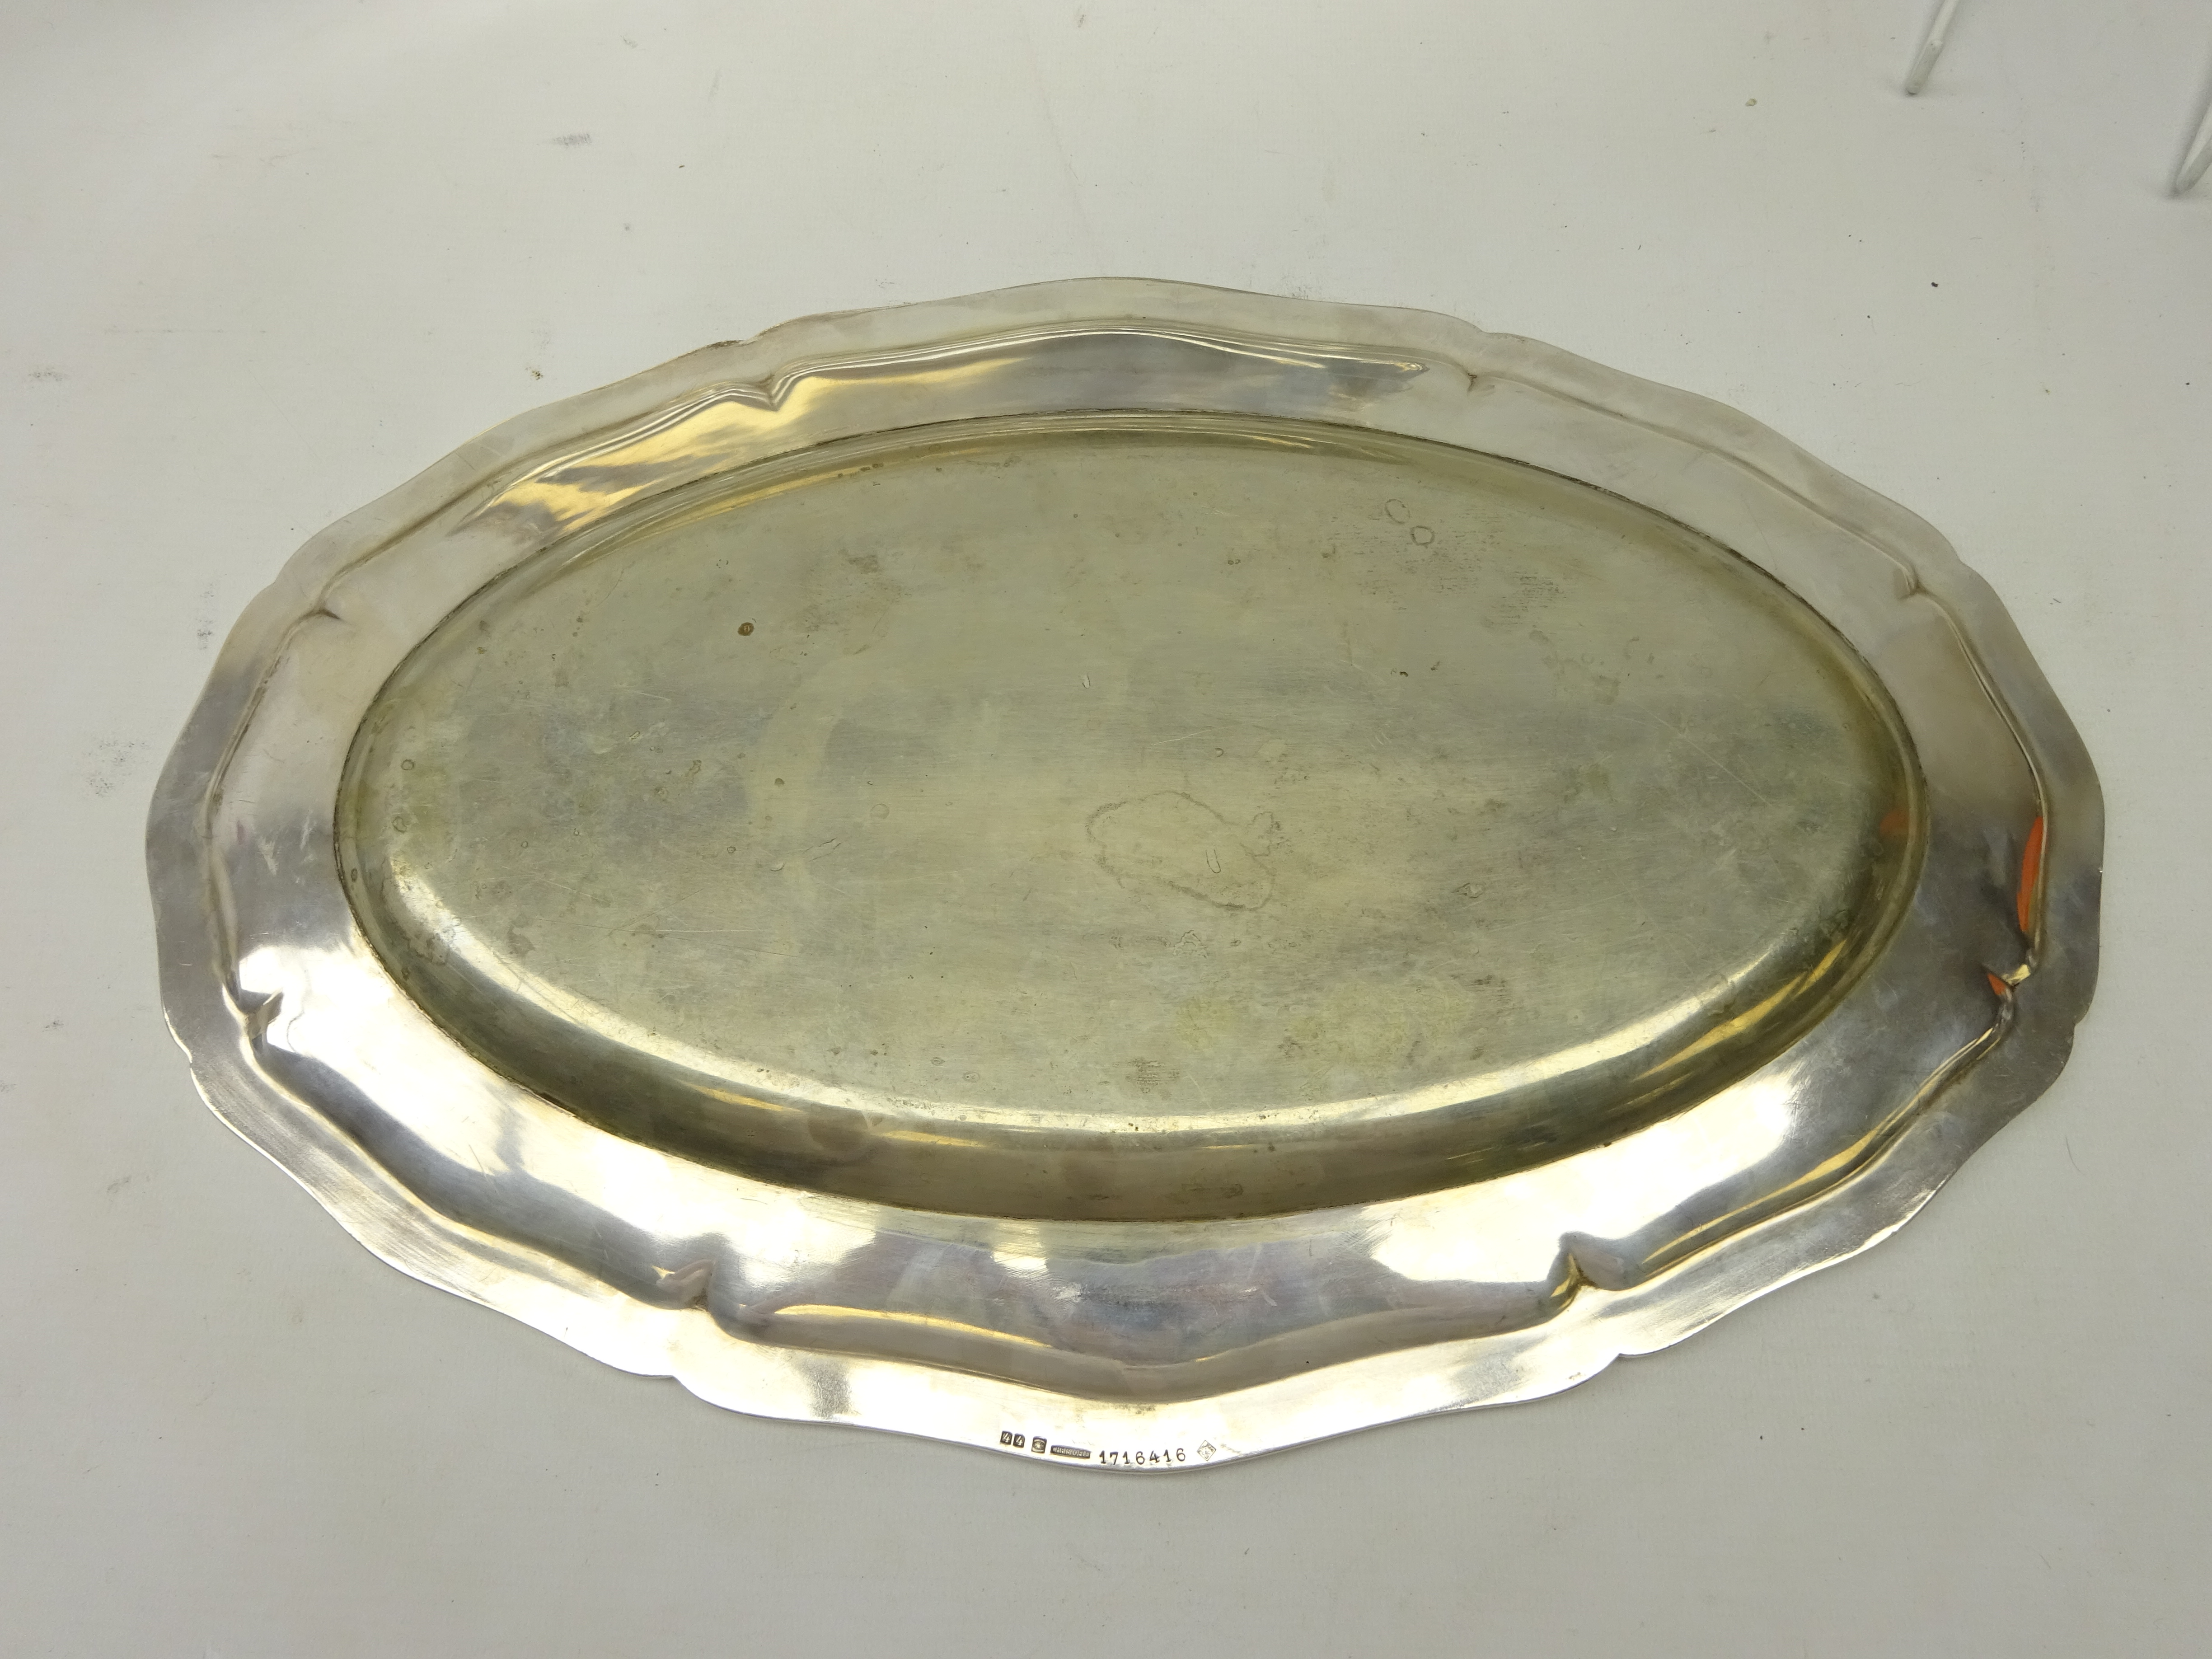 Late 19th century Christofle silver-plated tureen and cover with scalloped edge, - Image 6 of 18